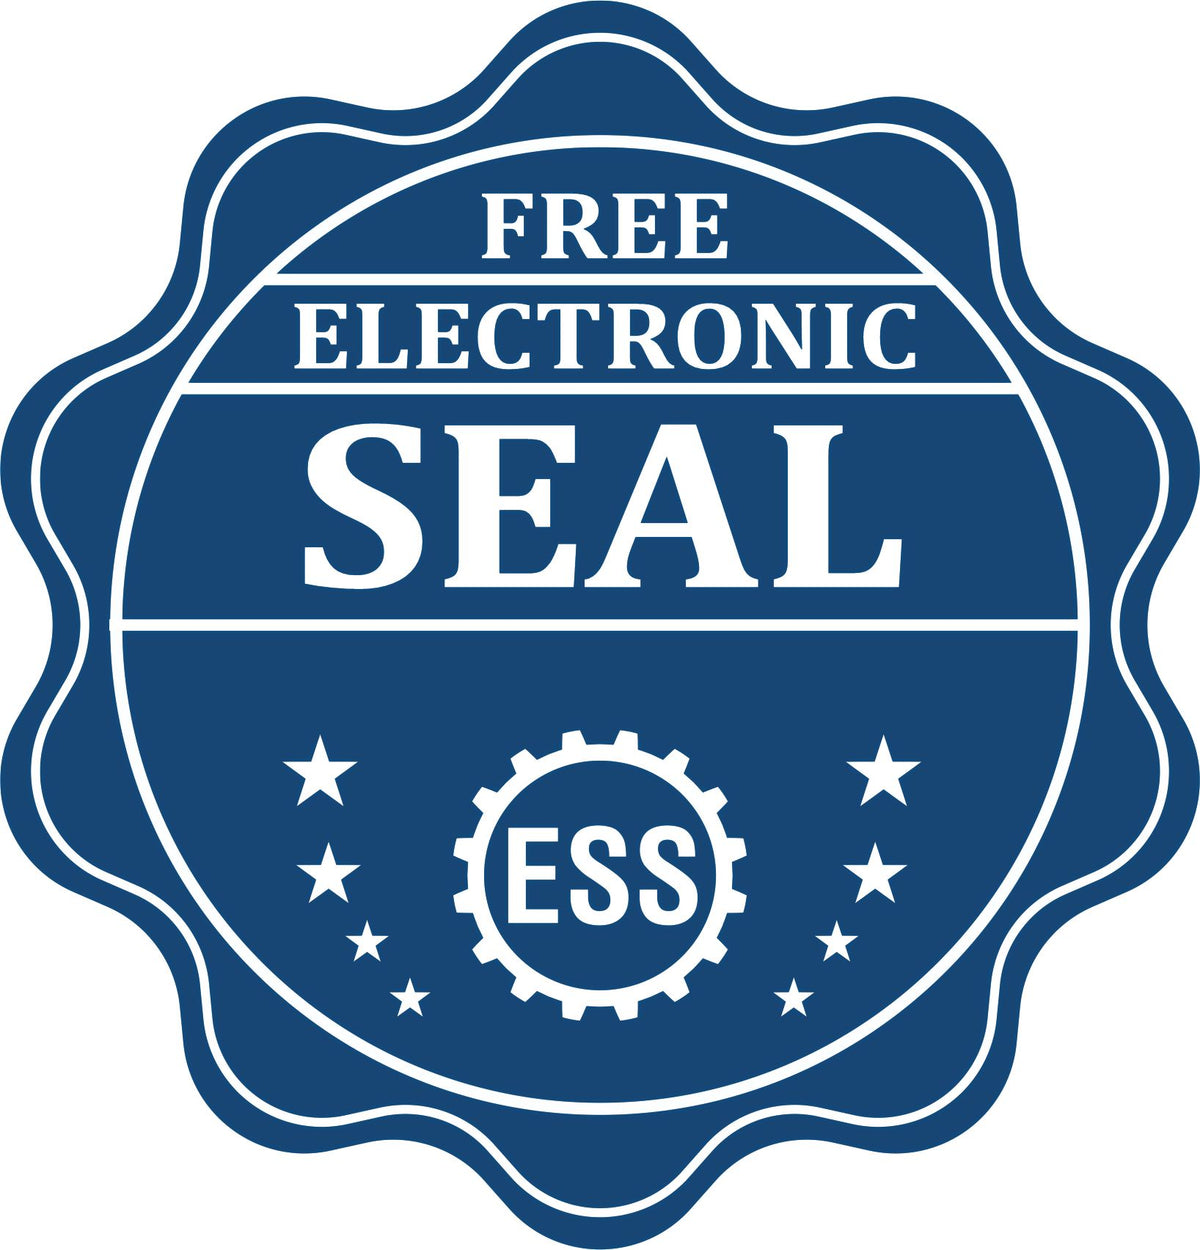 A badge showing a free electronic seal for the State of Idaho Extended Long Reach Engineer Seal with stars and the ESS gear on the emblem.